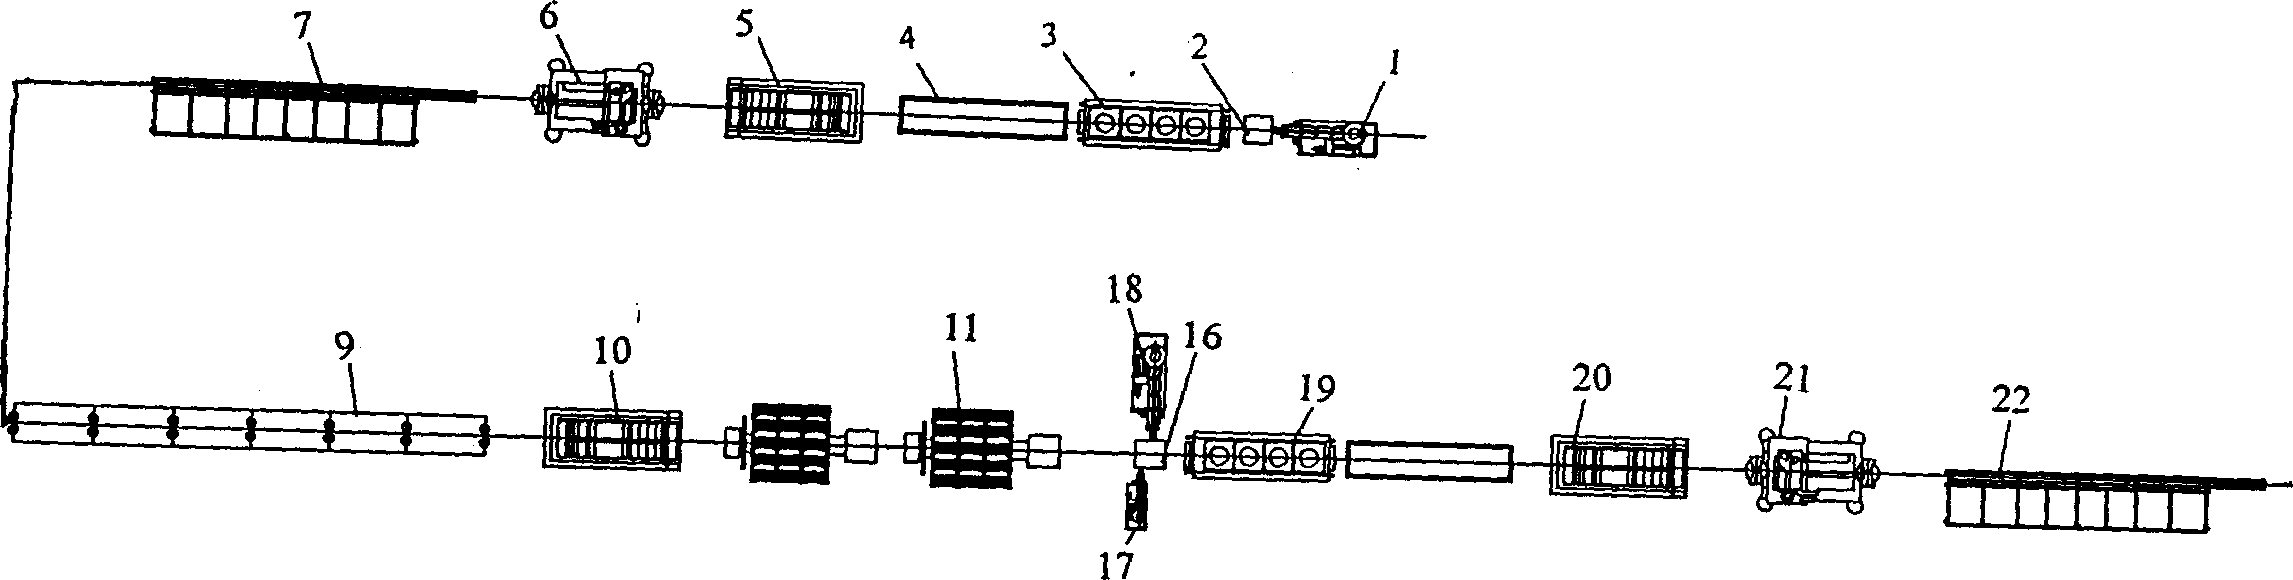 Inflating making process and apparatus of spiral wound steel wire reinforced composite plastic pipe